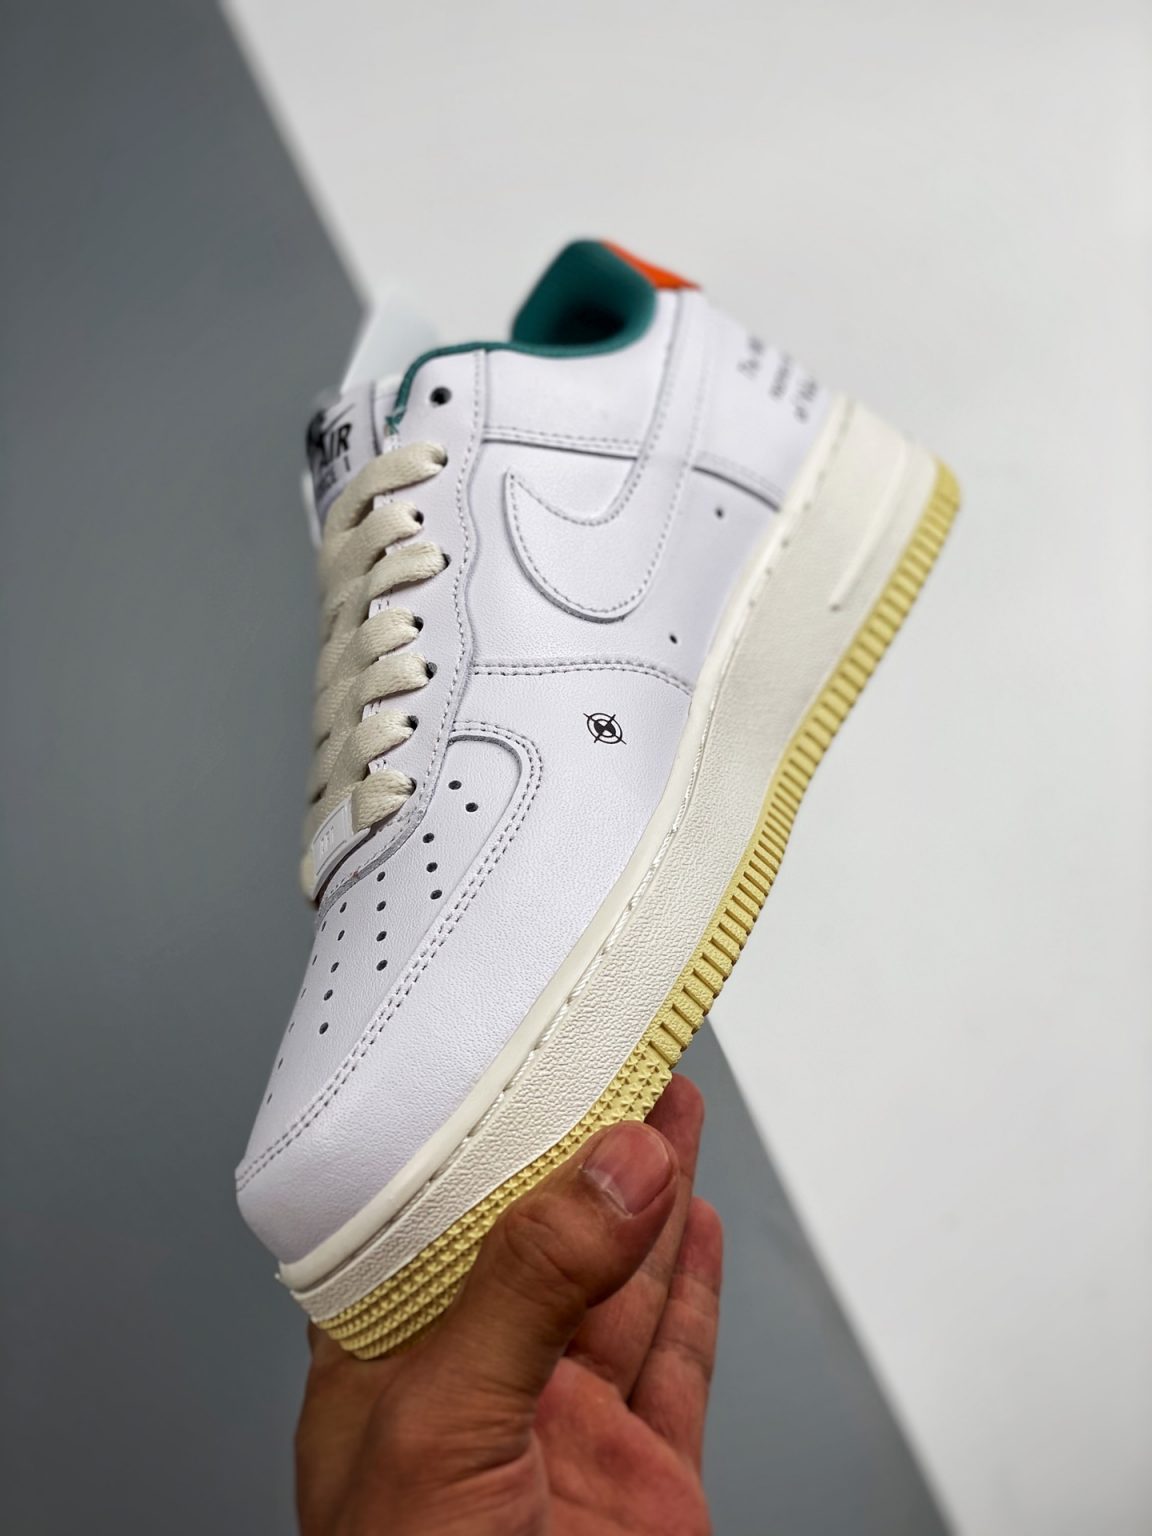 Nike Air Force 1 ’07 LE White/Sail/Starfish For Sale – Sneaker Hello